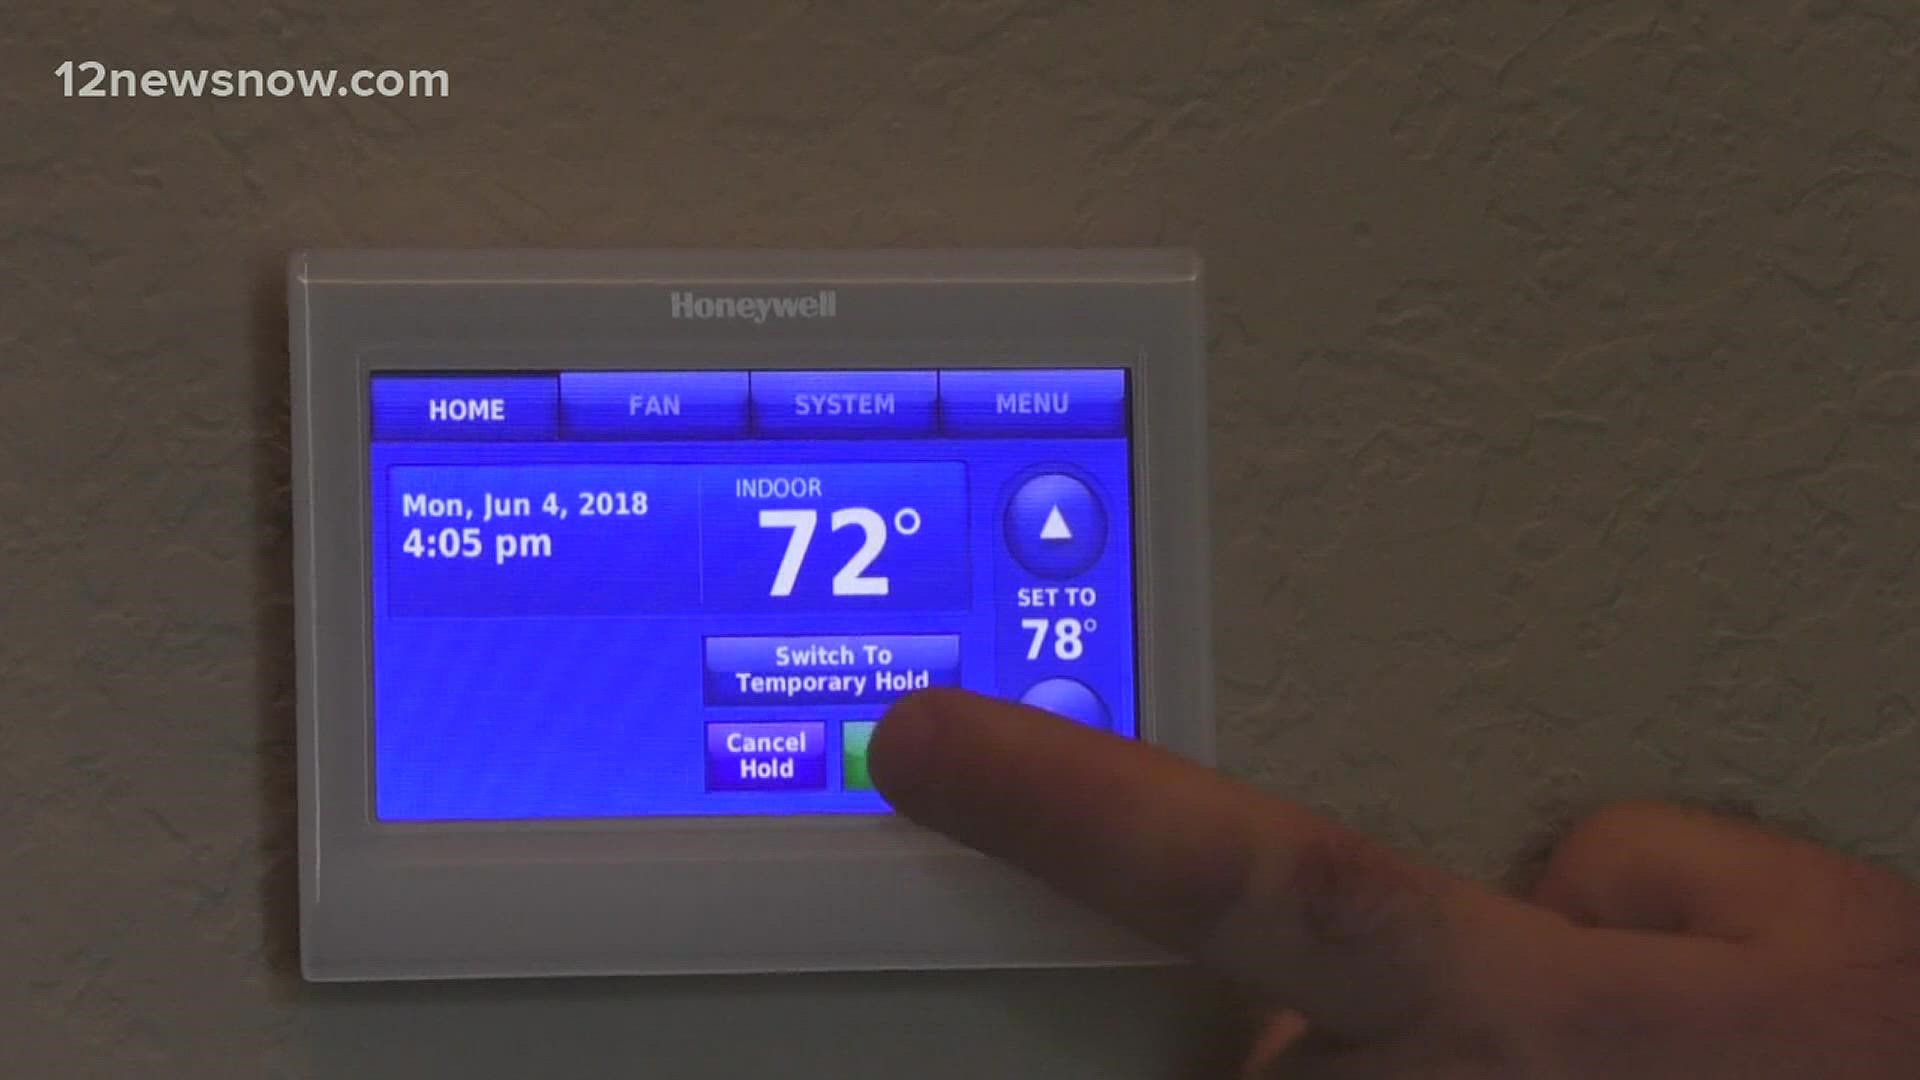 You're recommended to set your thermostat to 78 degrees.